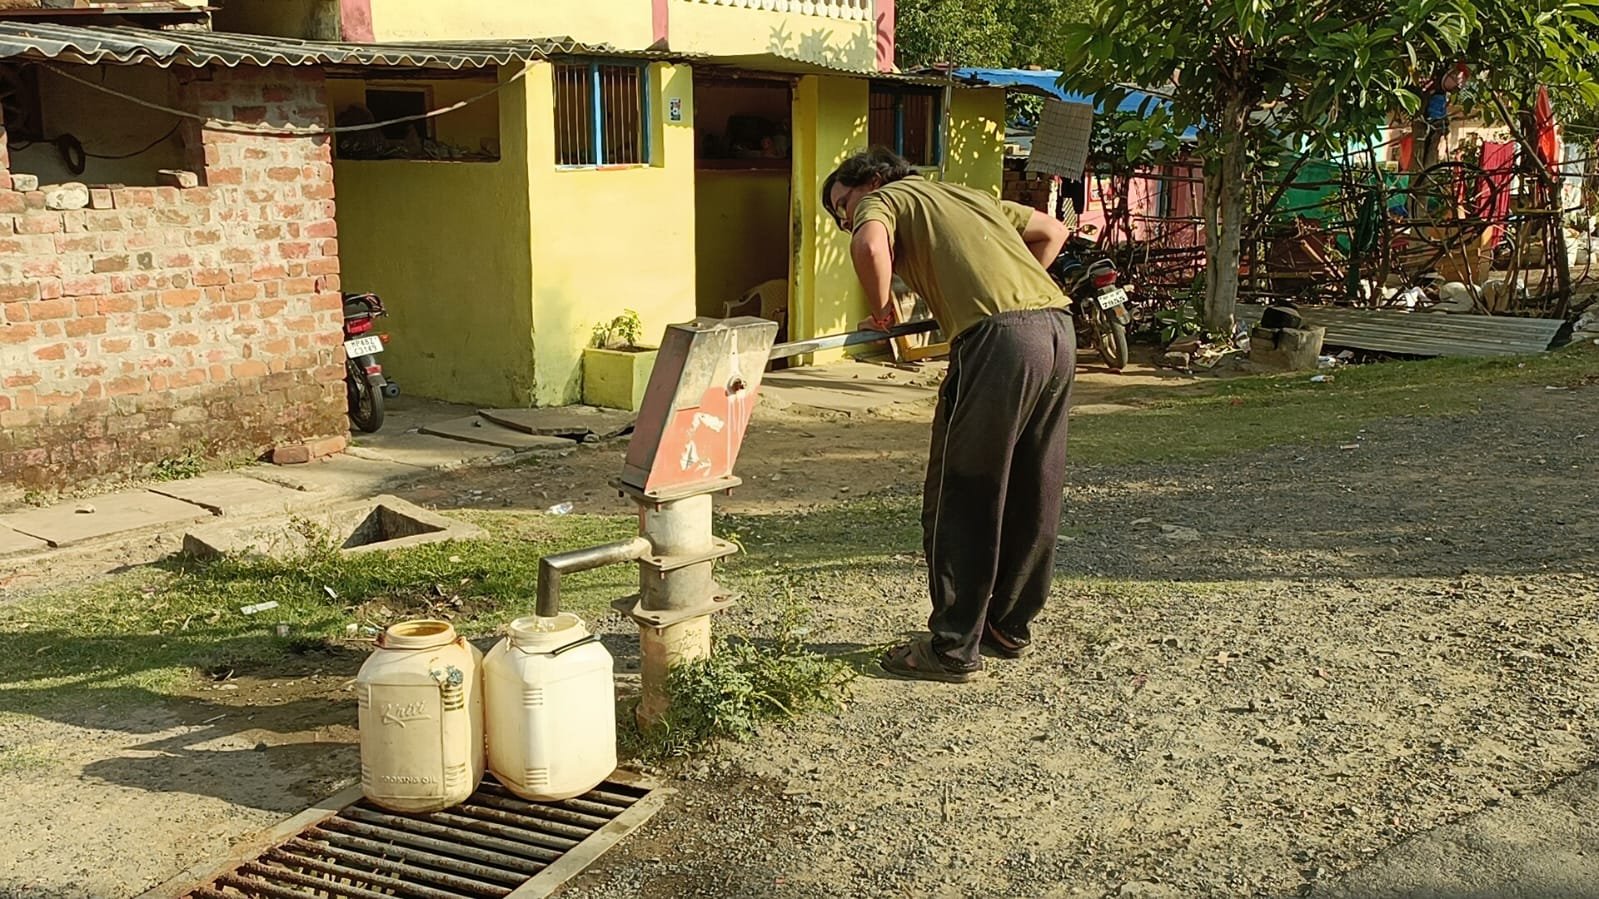 Water Crisis Water crisis deepens in scorching heat